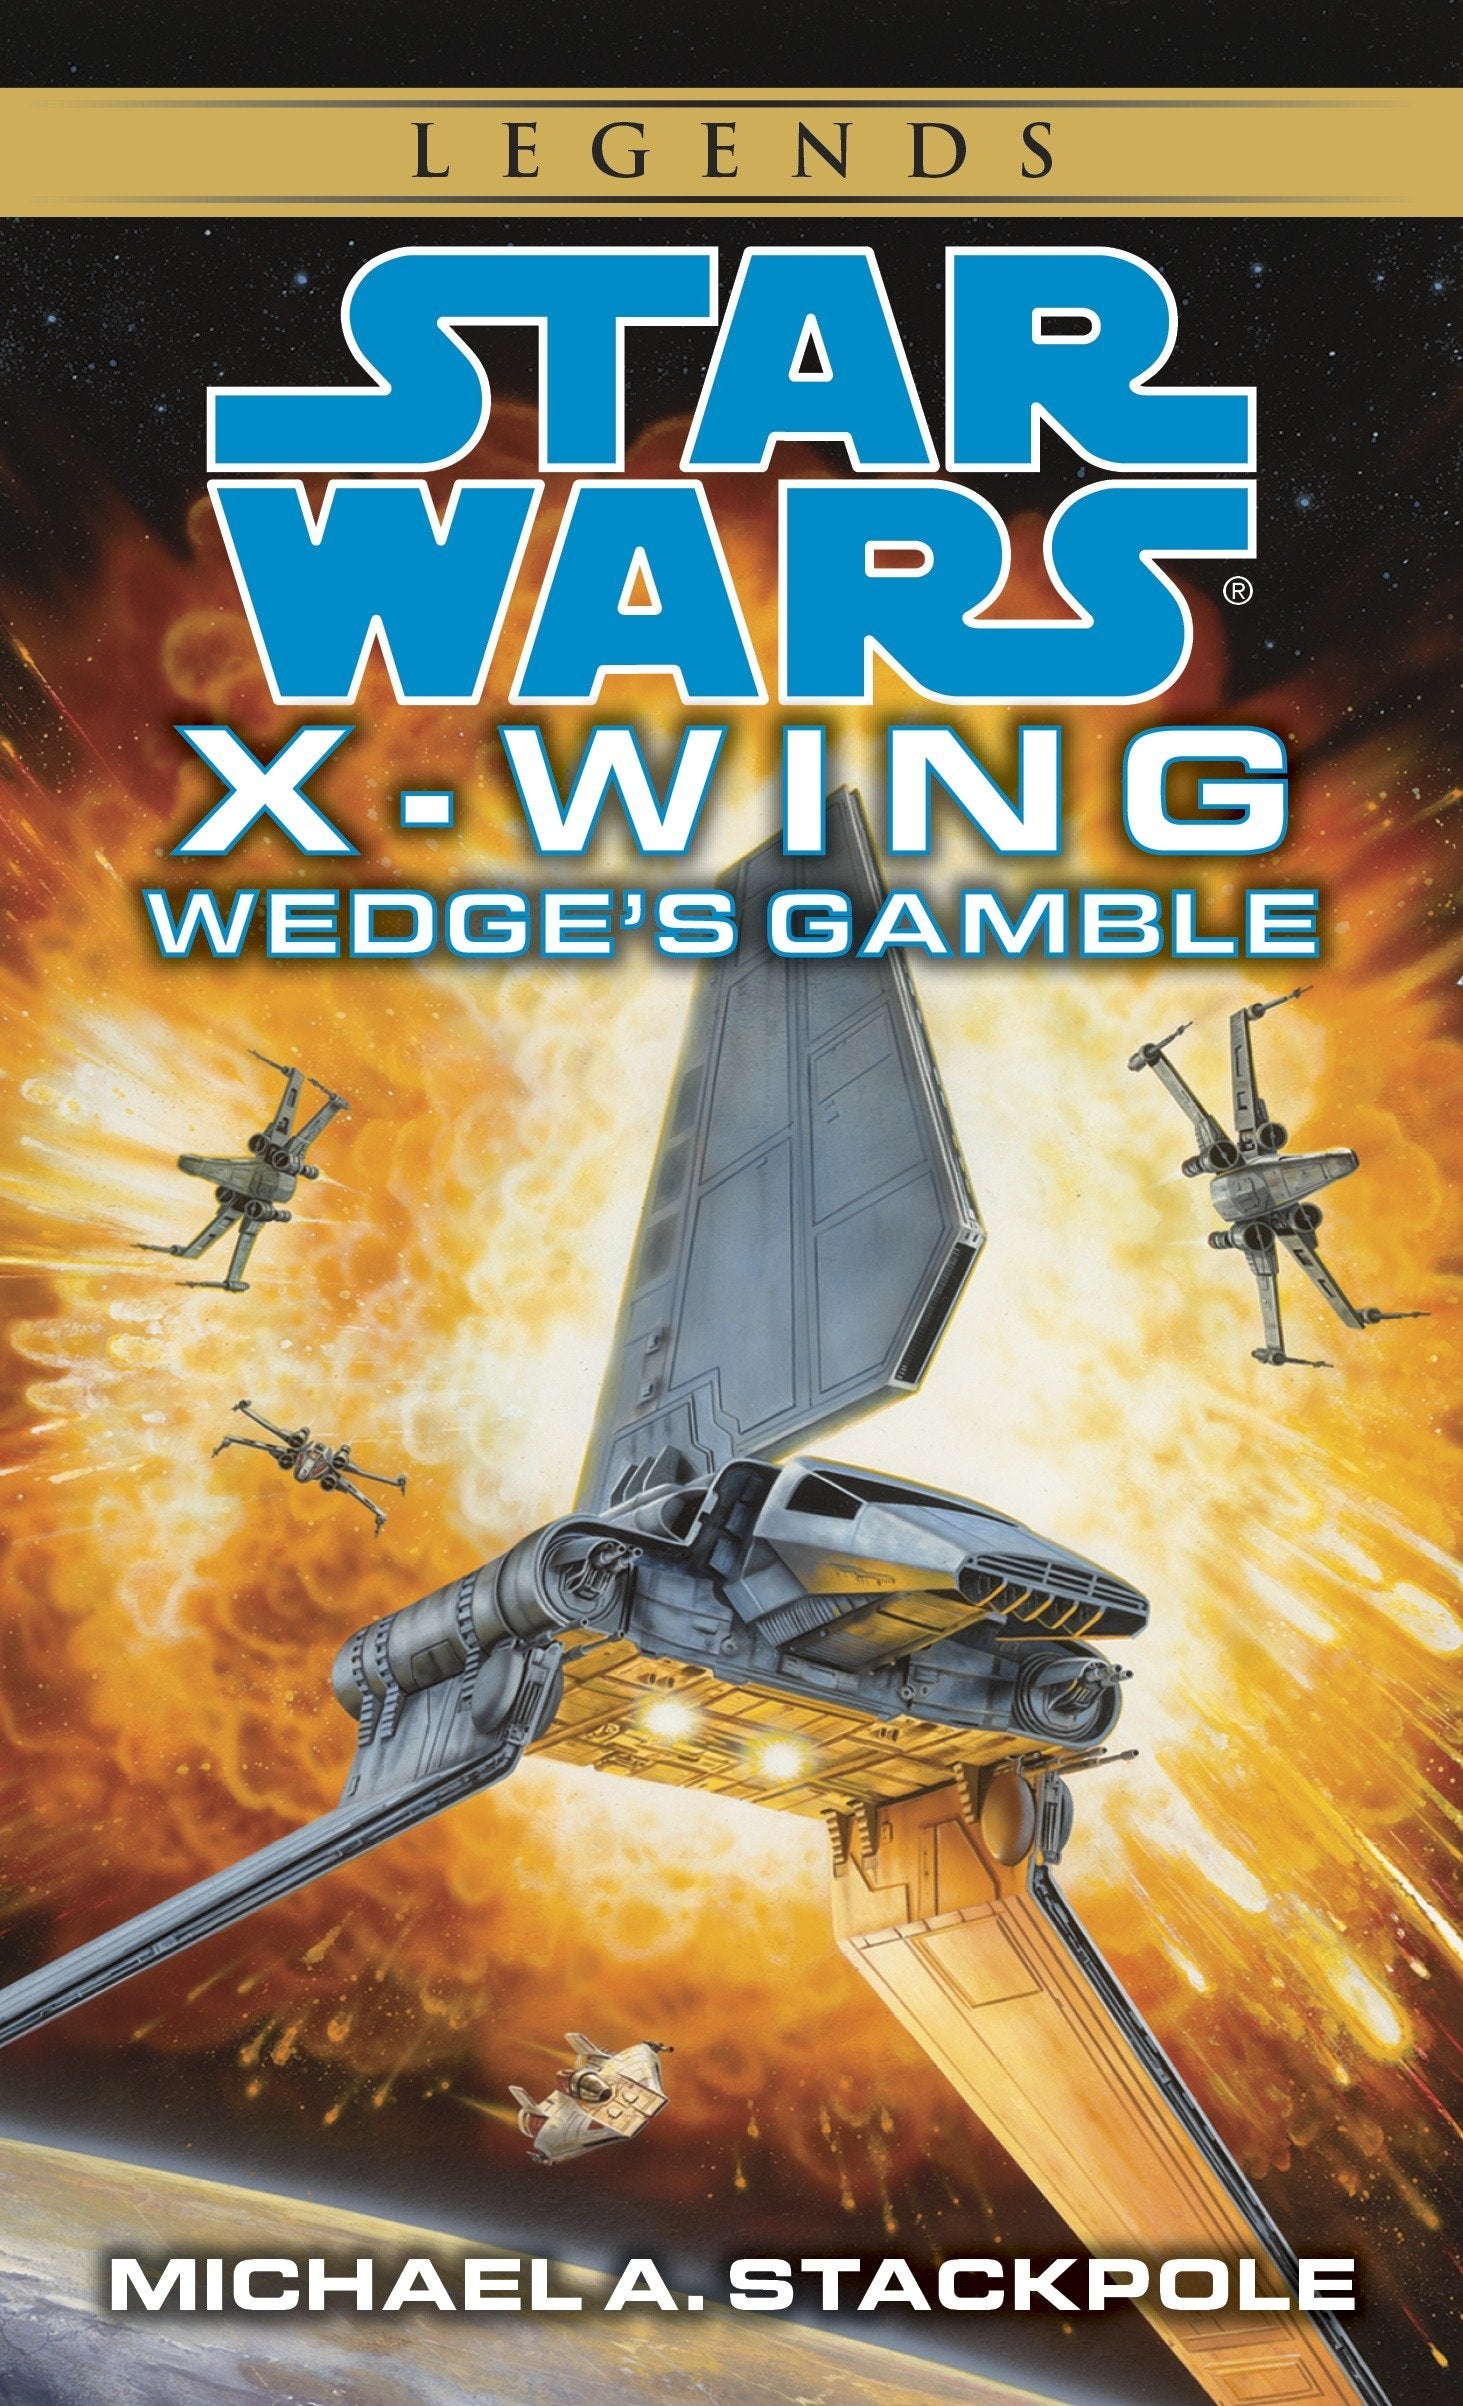 Livre ISBN 0553568027 Star Wars Legends : X-Wing # 2 : Wedge's Gamble (Michael A. Stackpole)